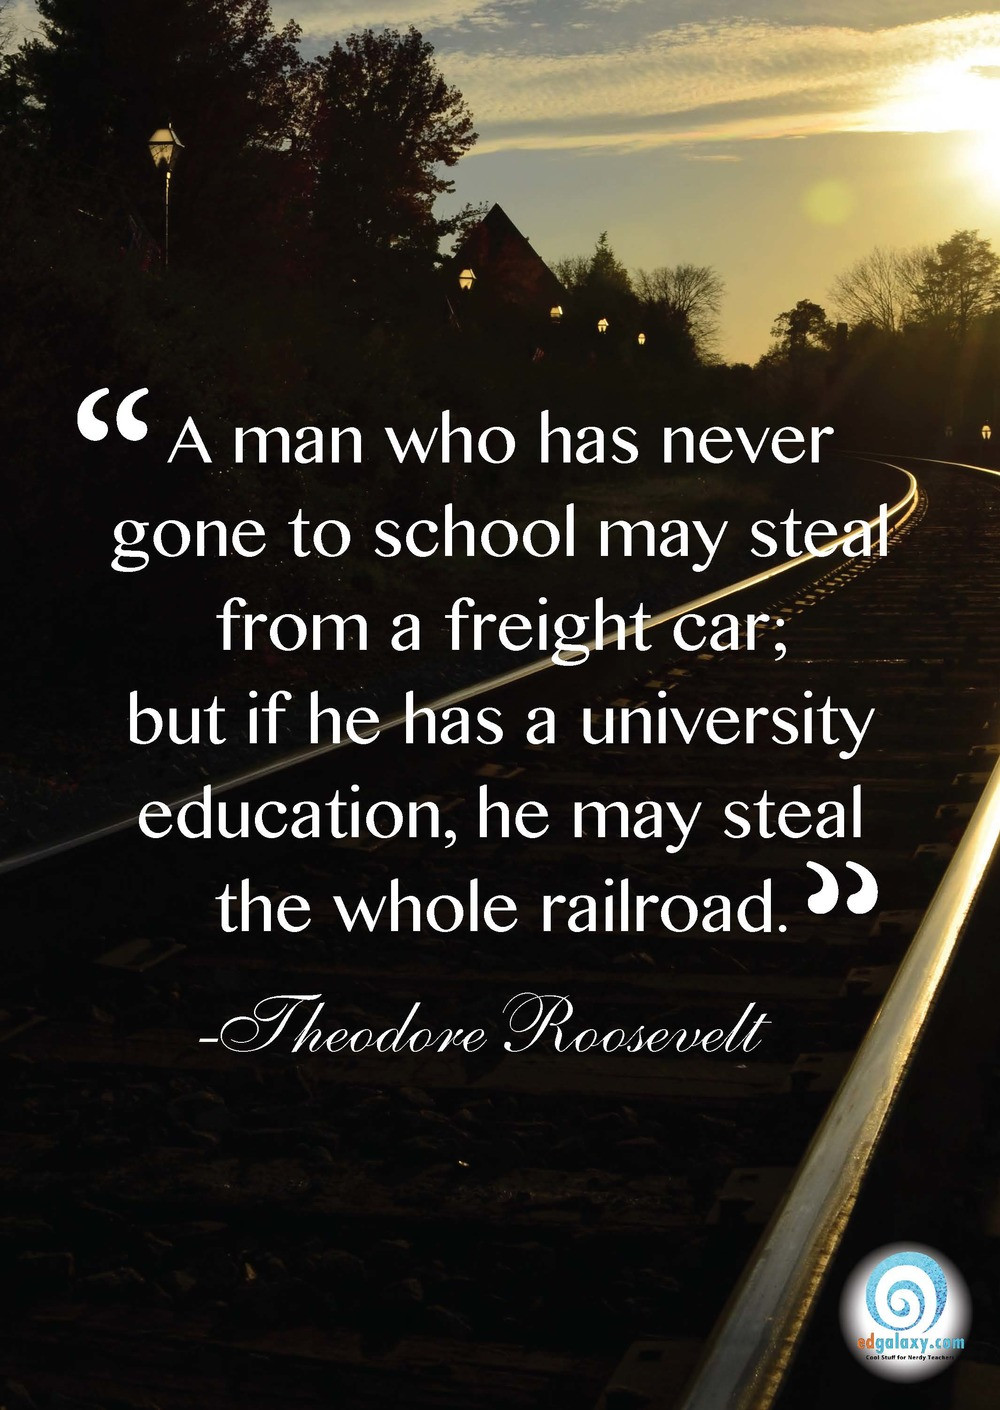 Inspirational Quotes About Educators
 Education Quotes Famous Quotes for teachers and Students